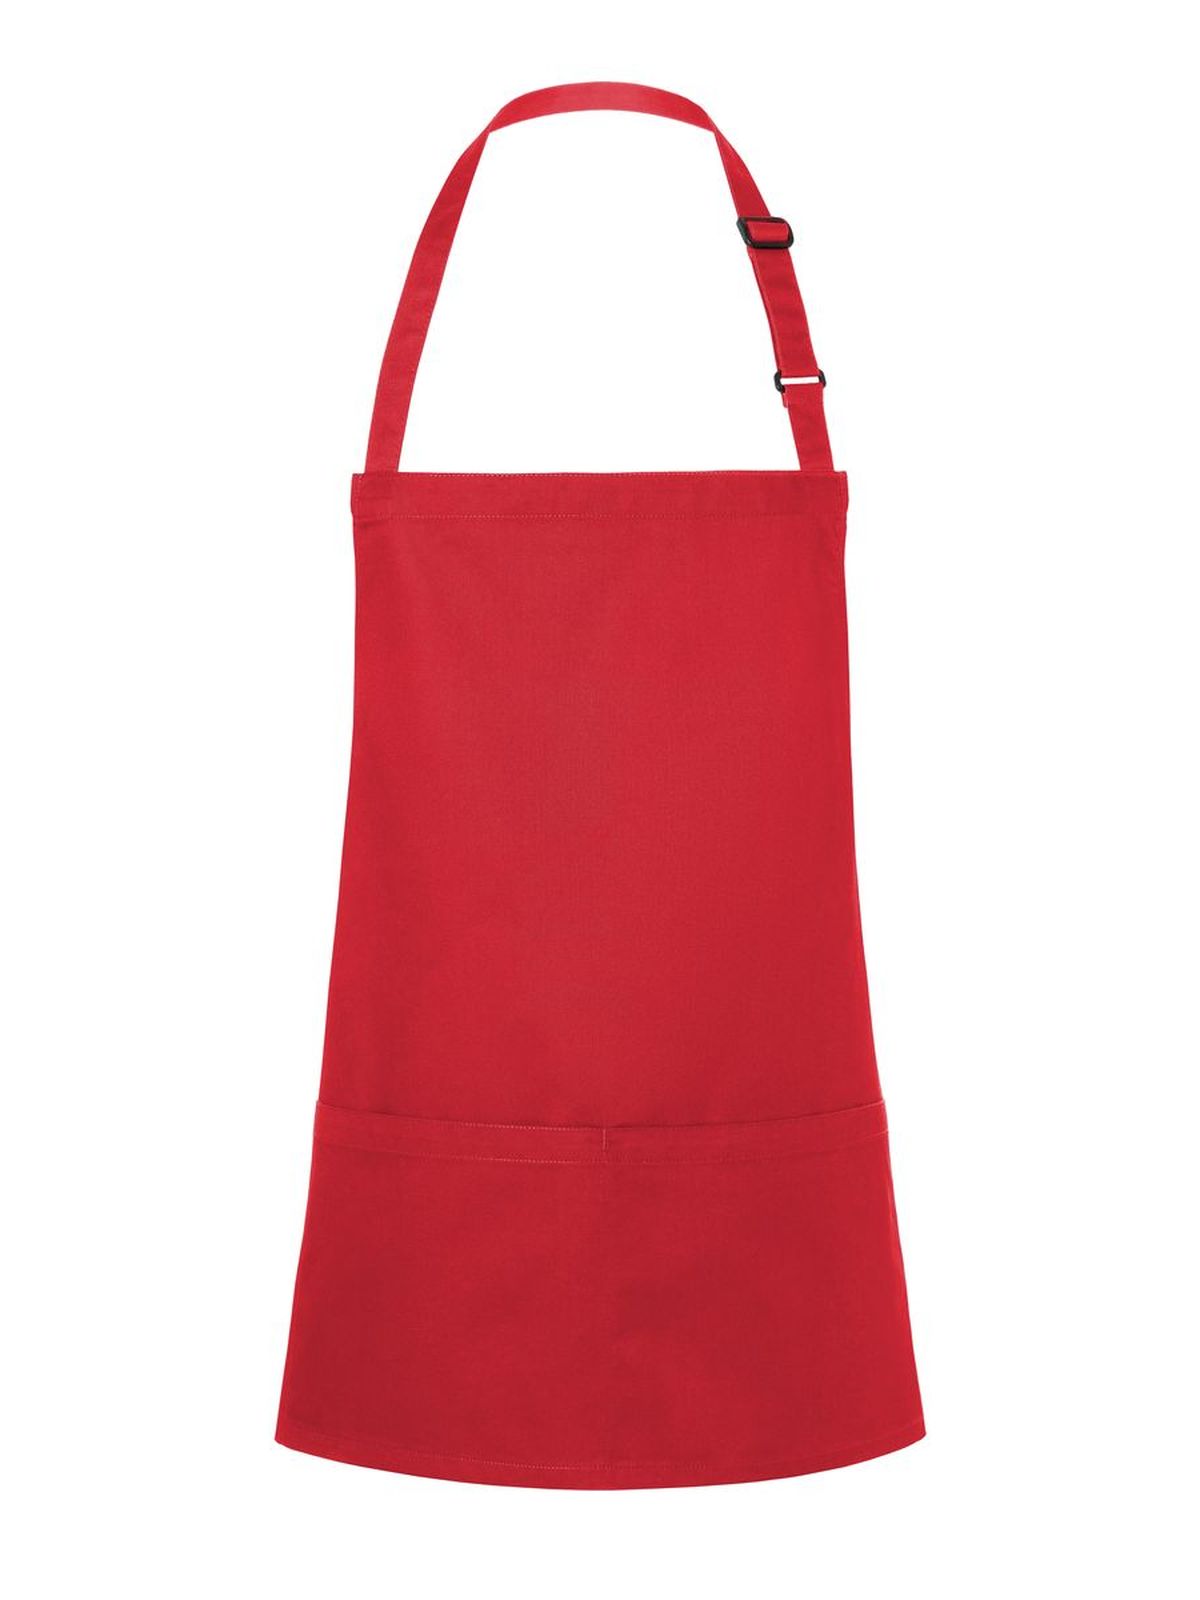 short-bib-apron-basic-with-buckle-and-pocket-0-red.webp